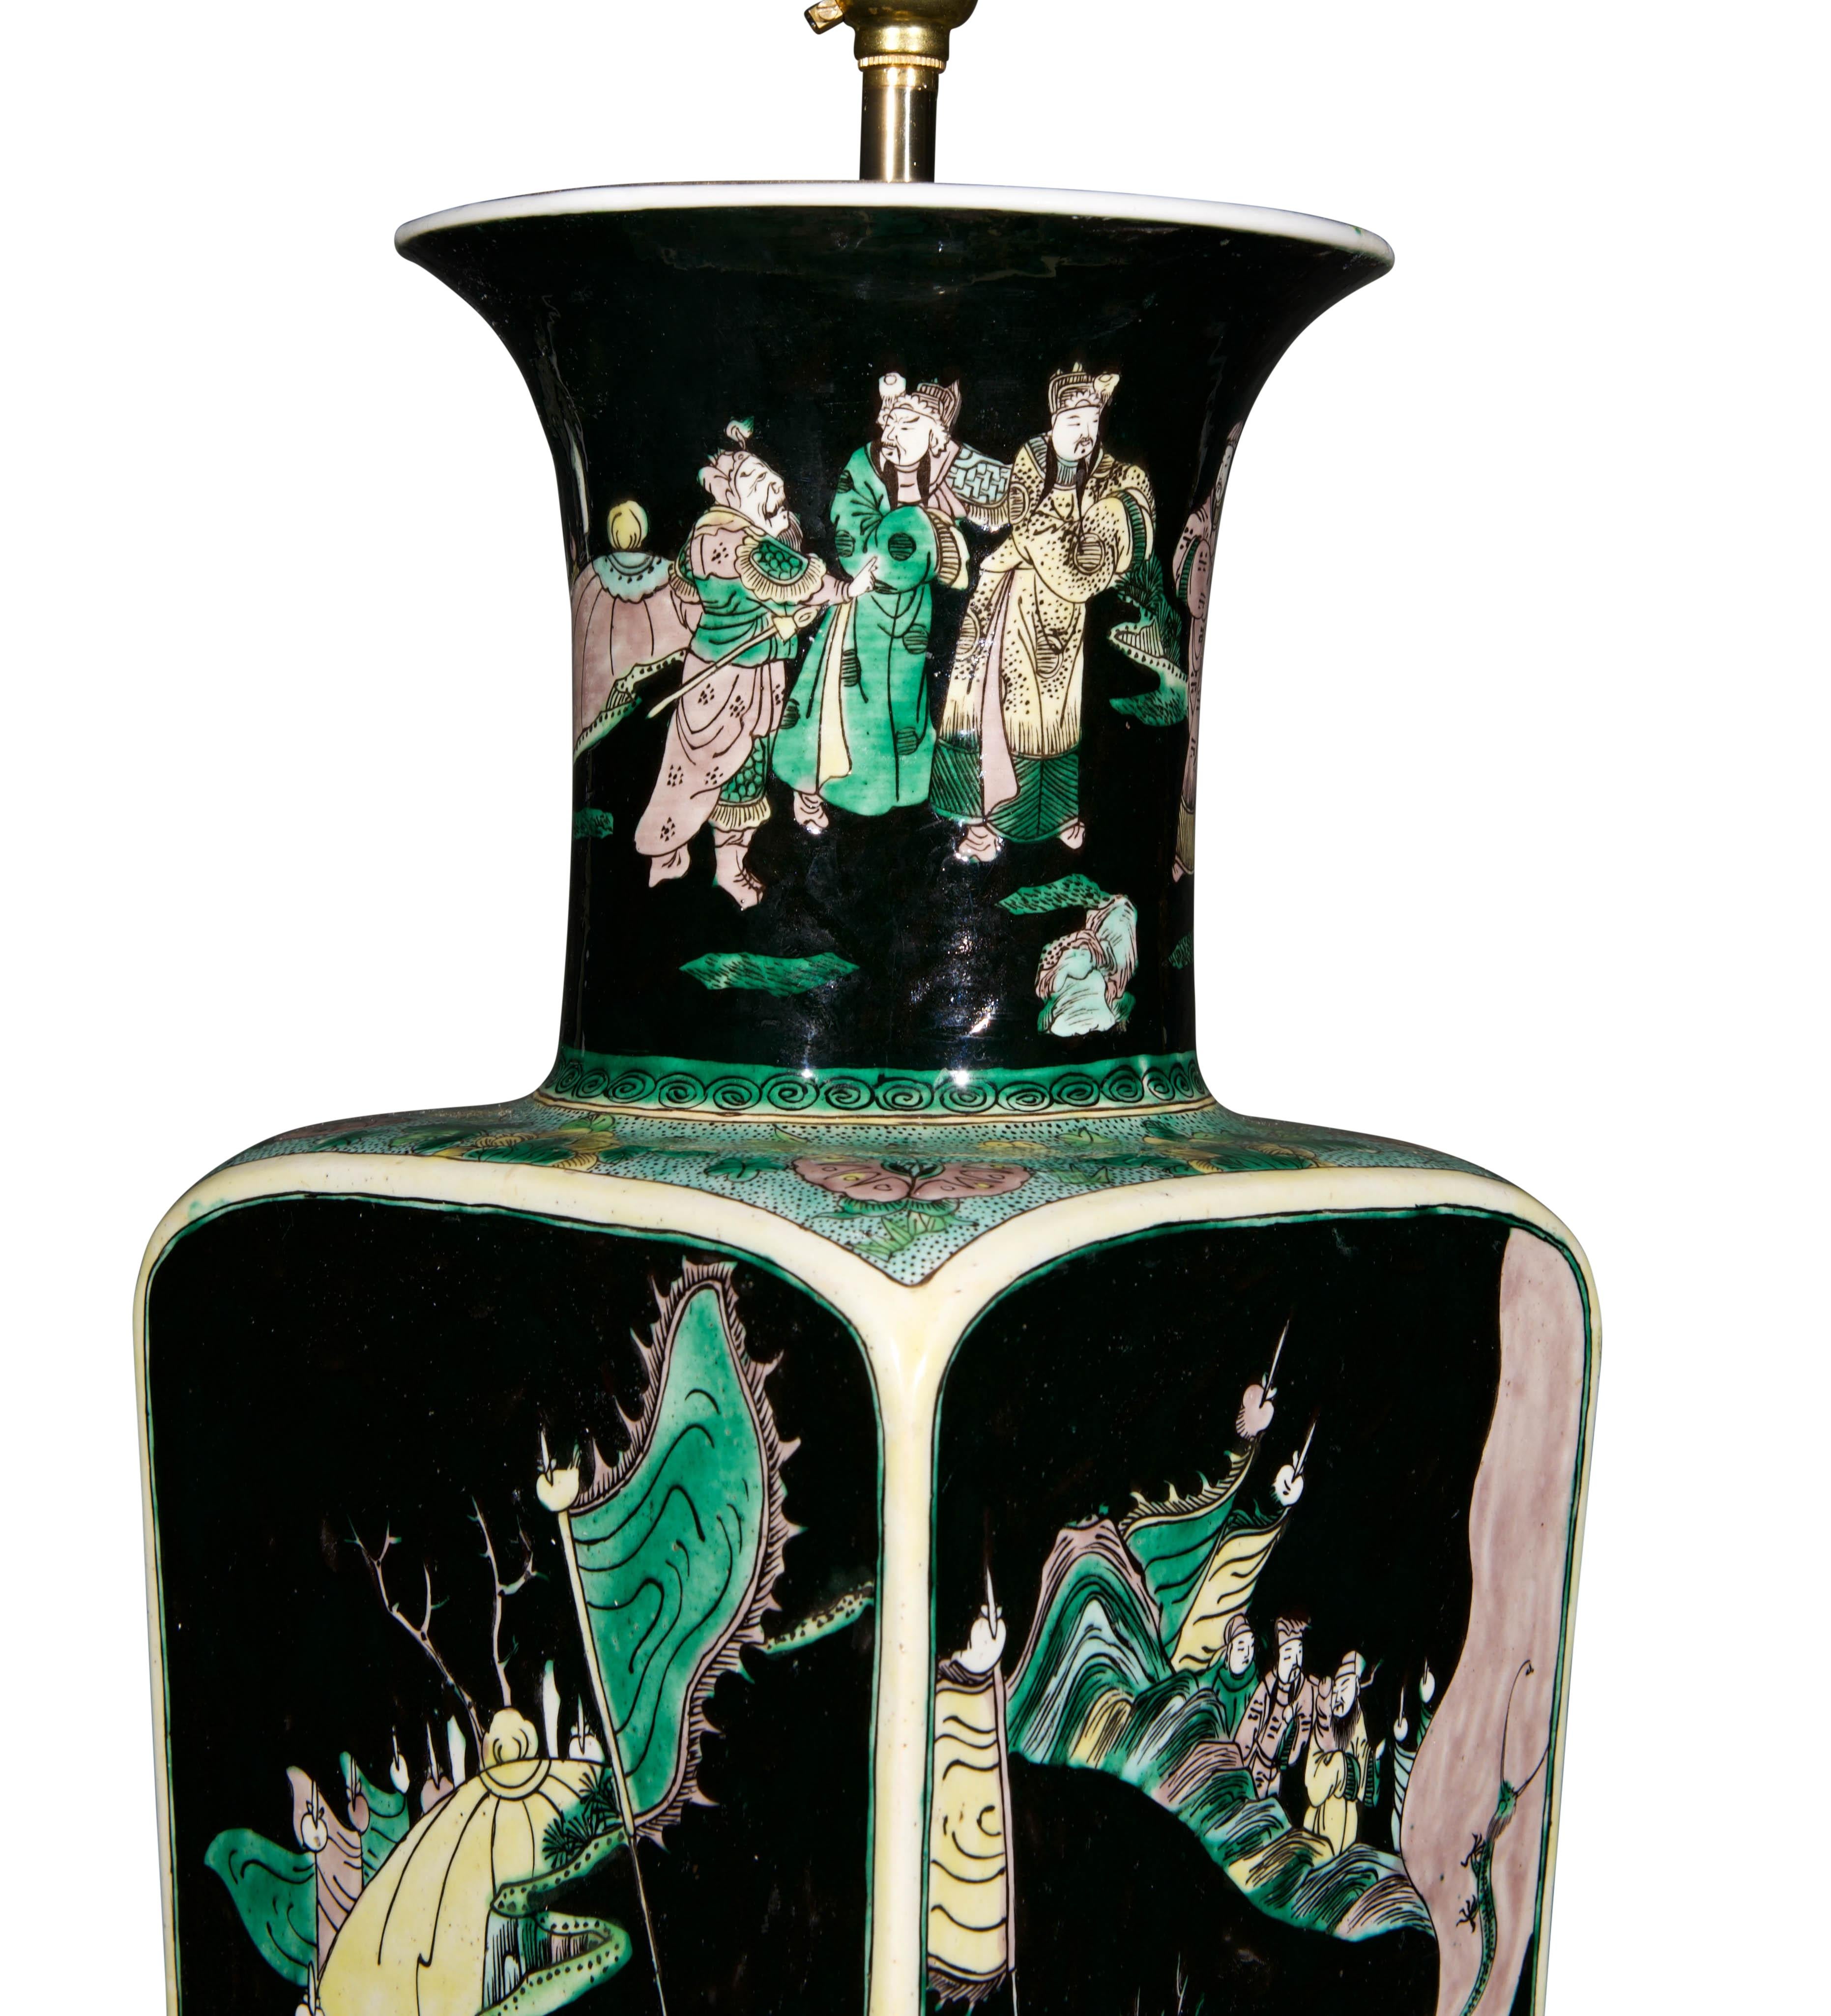 A fine late 19th century Qing dynasty vase, of square taering form with a flared circular neck, decorated throughout with the famille noire palette with green detailing, with seven warriors in a continuous scene in a stylised landscape, now mounted